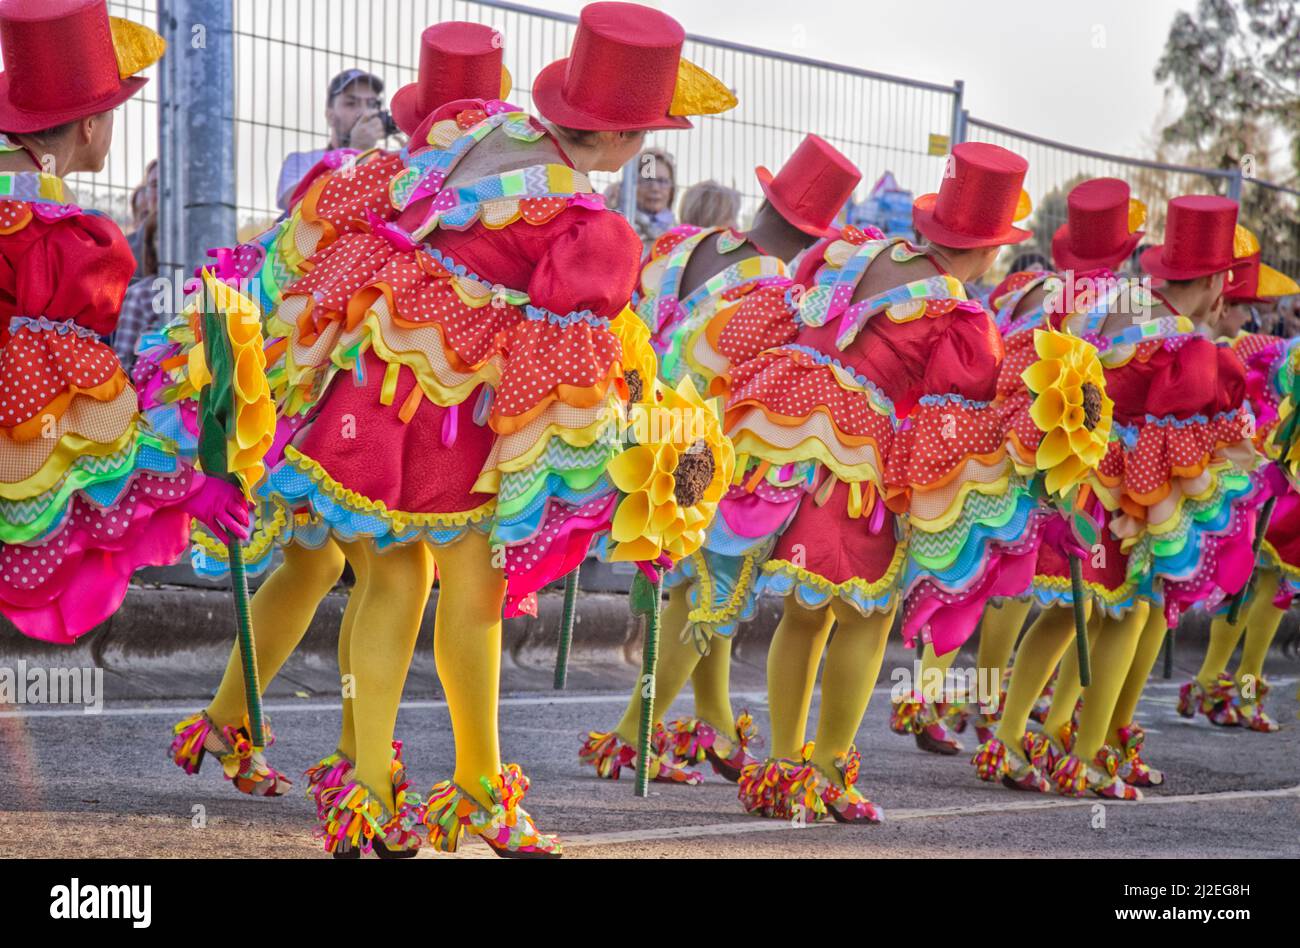 Portugal - Women in Red Top hats and frilly dresses dancing - "An open-air opera - Parintins Festival. Ovar, Grande Desfile or Big Parade Stock Photo - Alamy